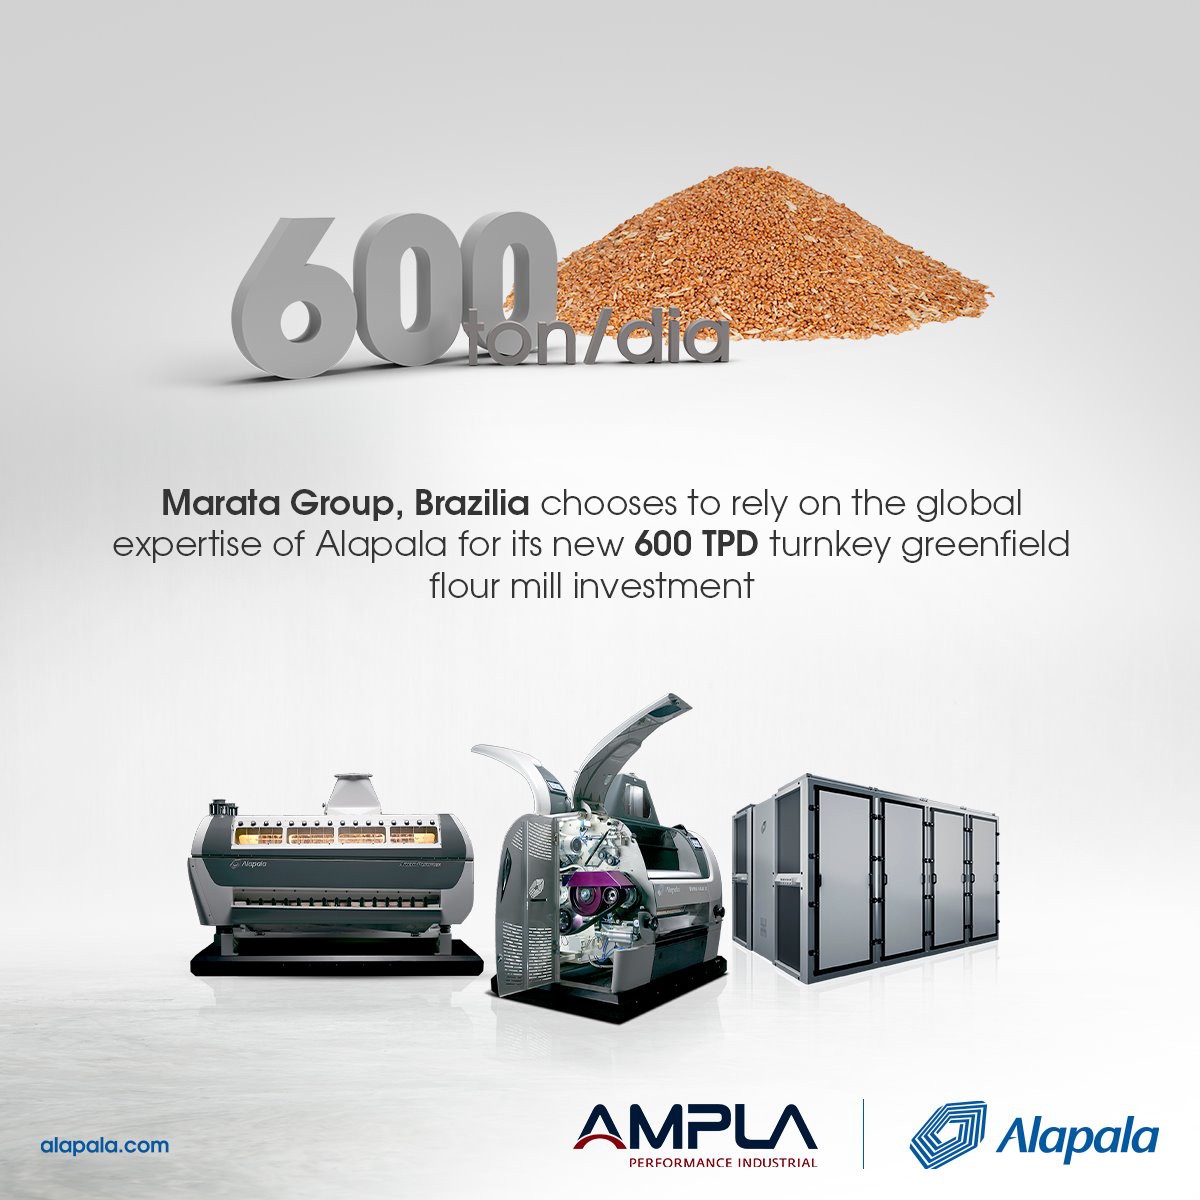 Brazil's Marata Group has chosen Alapala technology to invest in its 600 TPD flour mill